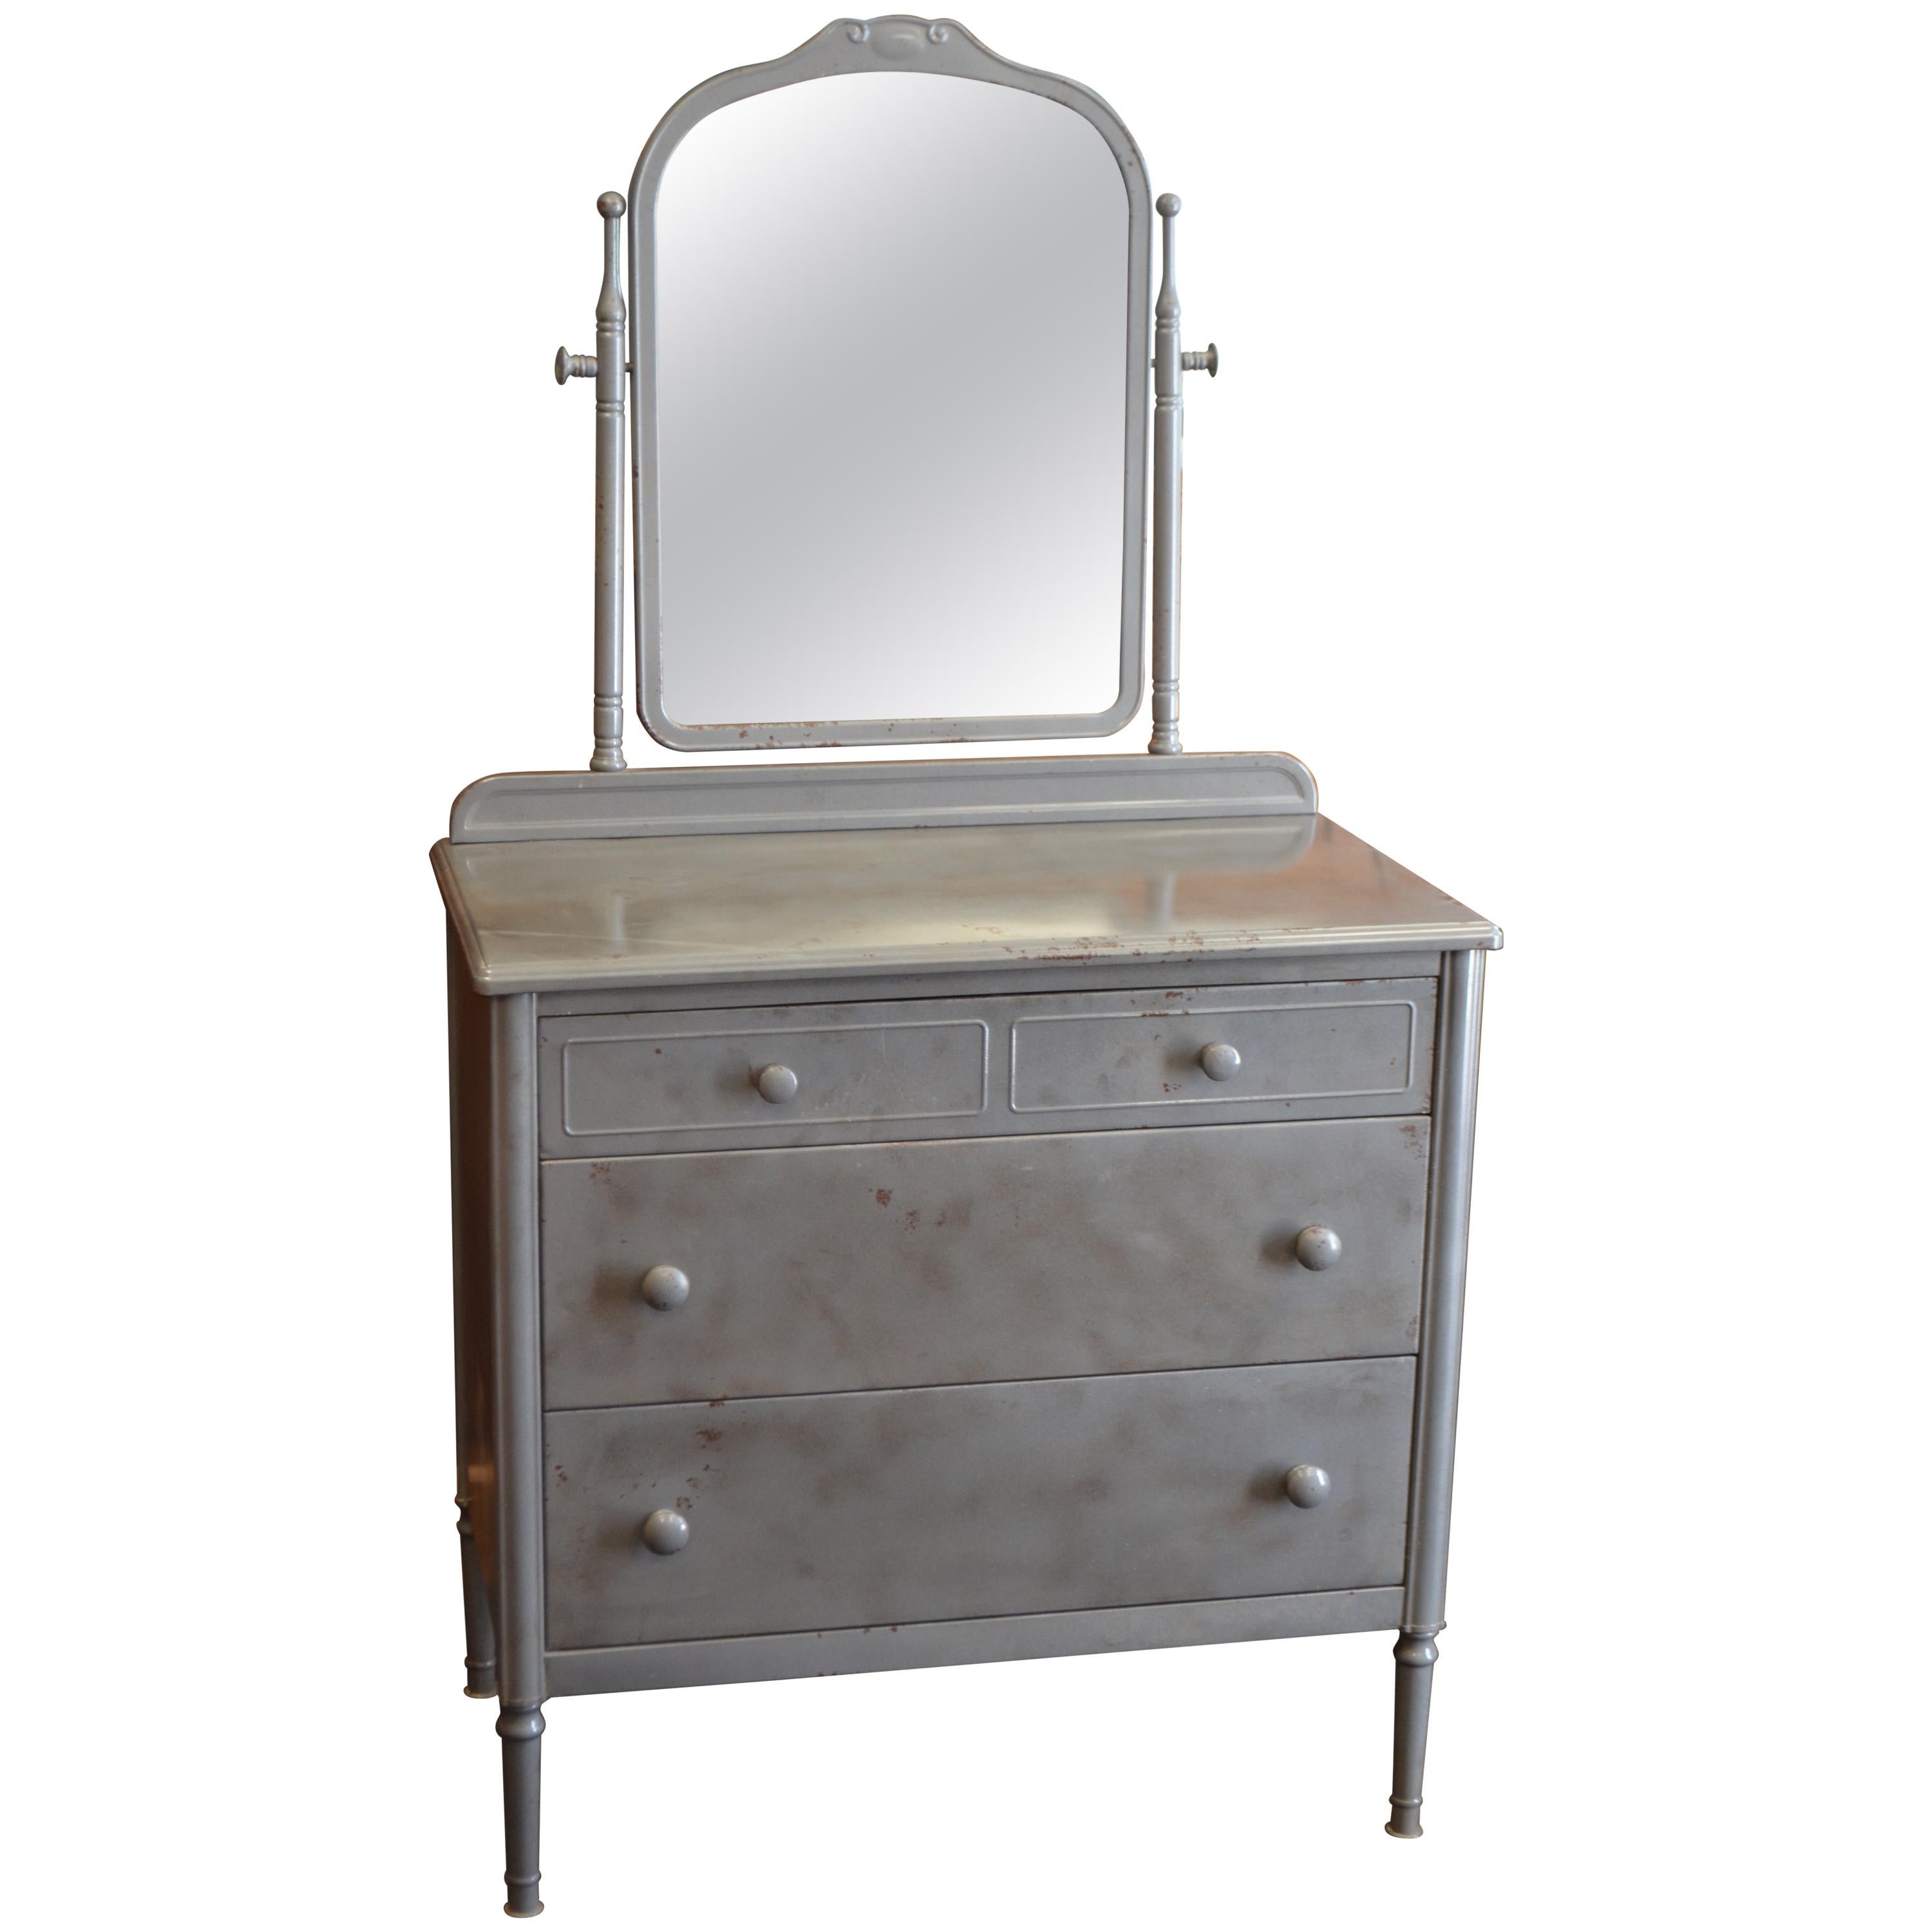 Dresser of Steel with Mirror by Simmons, circa 1930s.